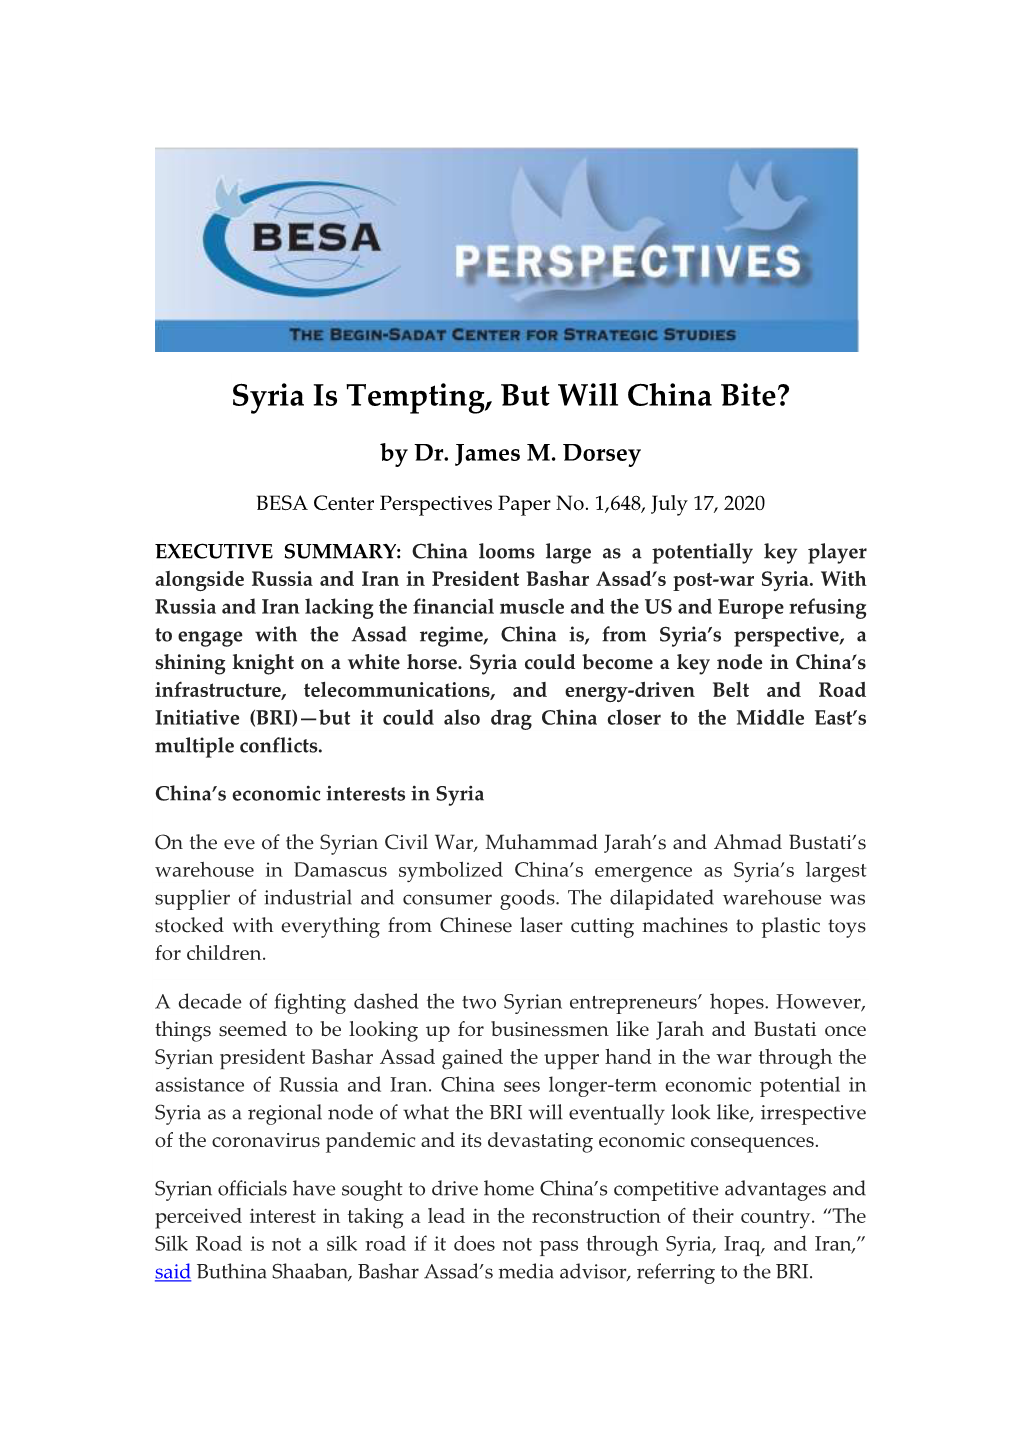 Syria Is Tempting, but Will China Bite?